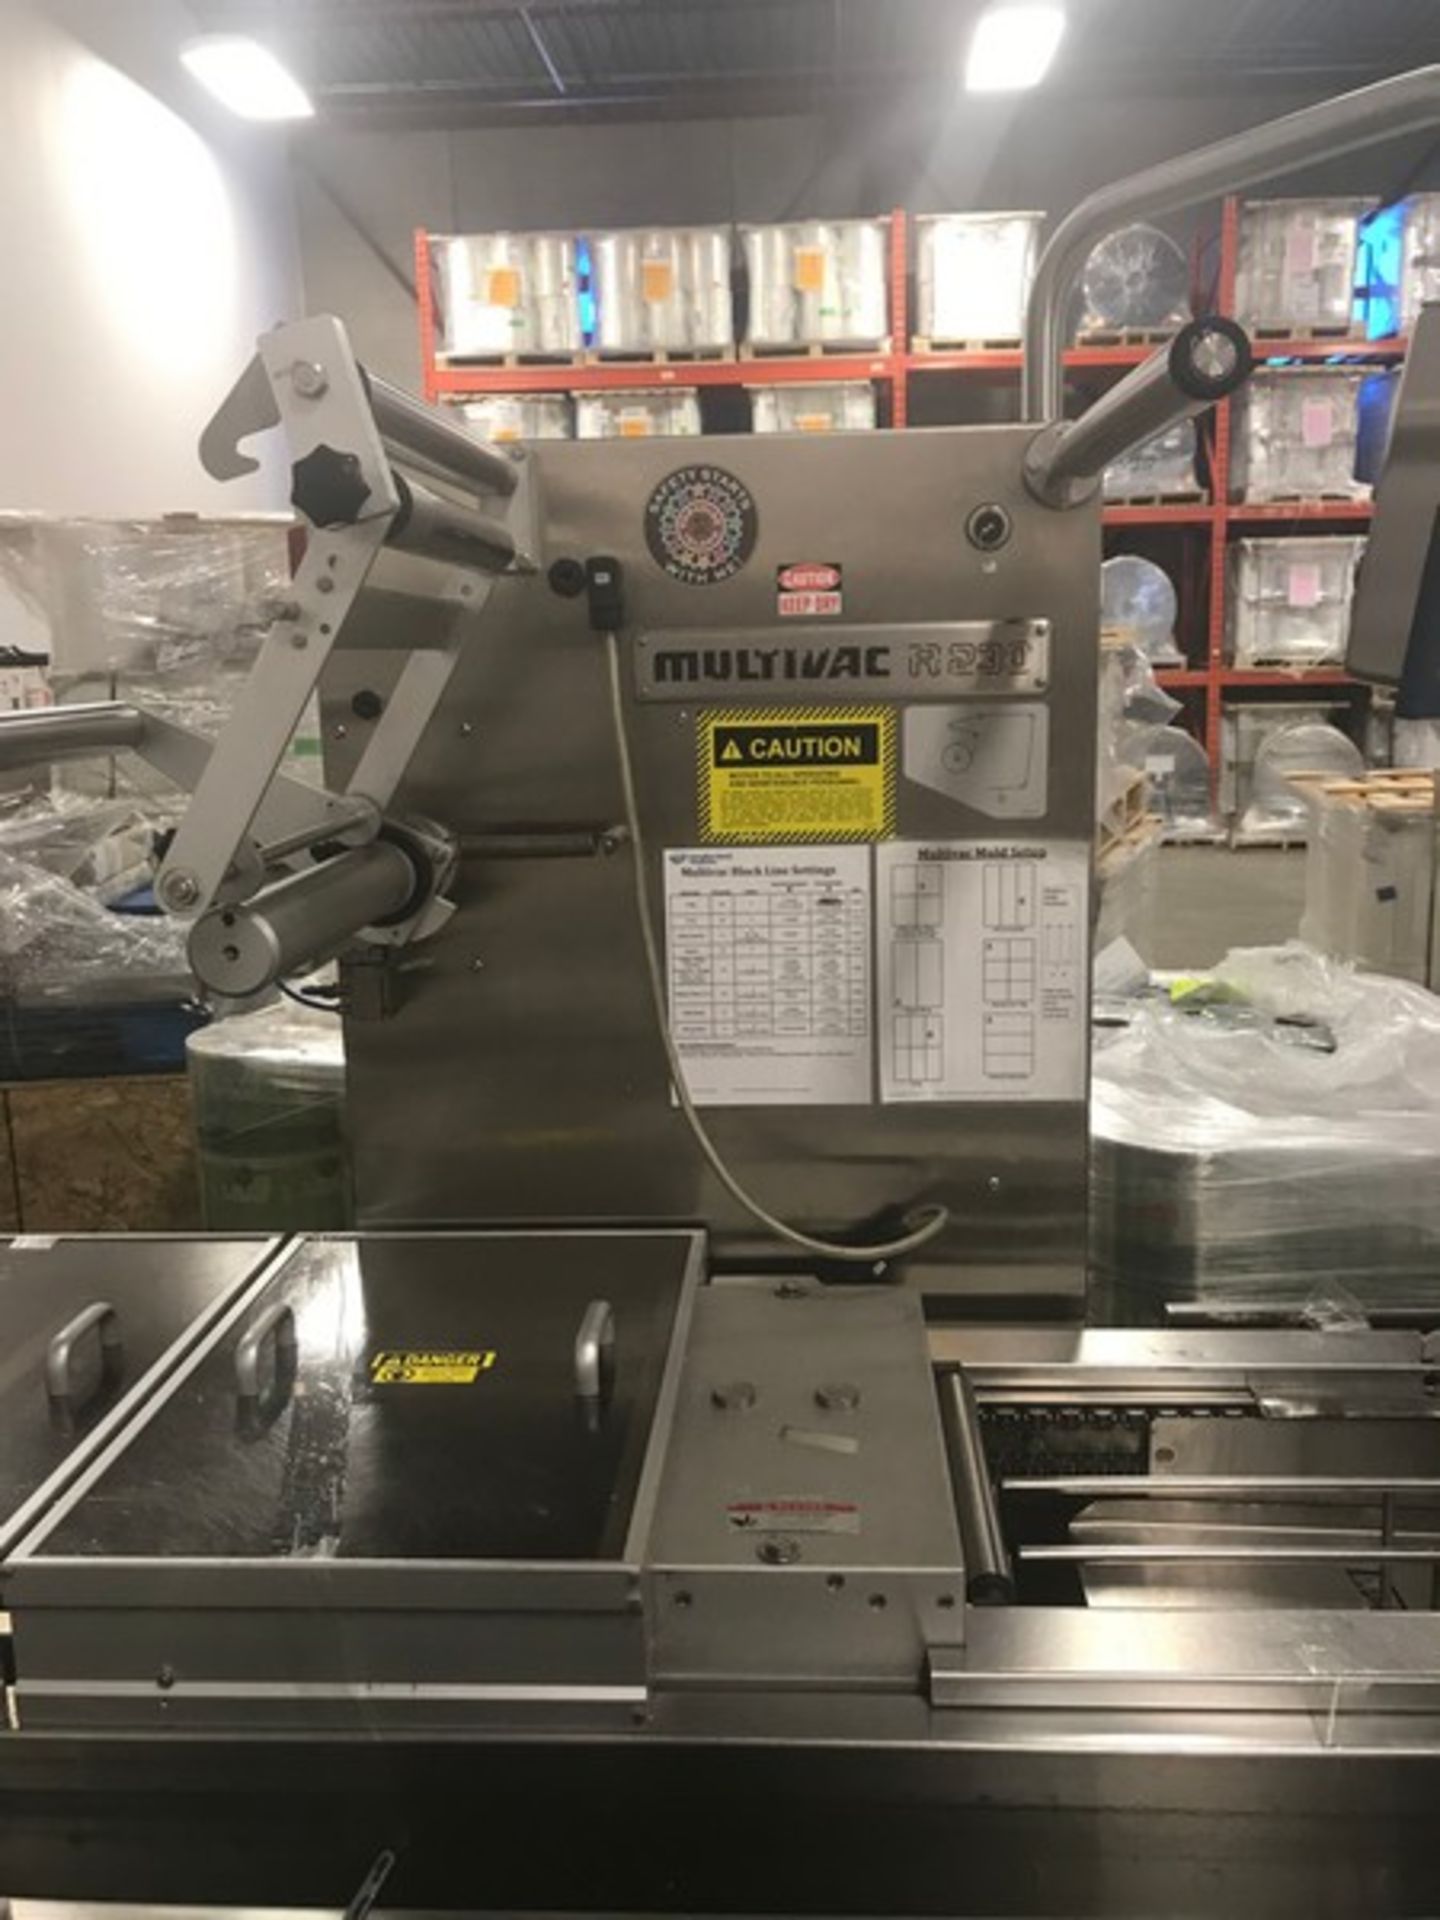 Multivac Vacuum Packaging Machine, Model R230, S/N 810, 220 V/60 Hz (1999) (Unit #96) (Located New - Image 2 of 7